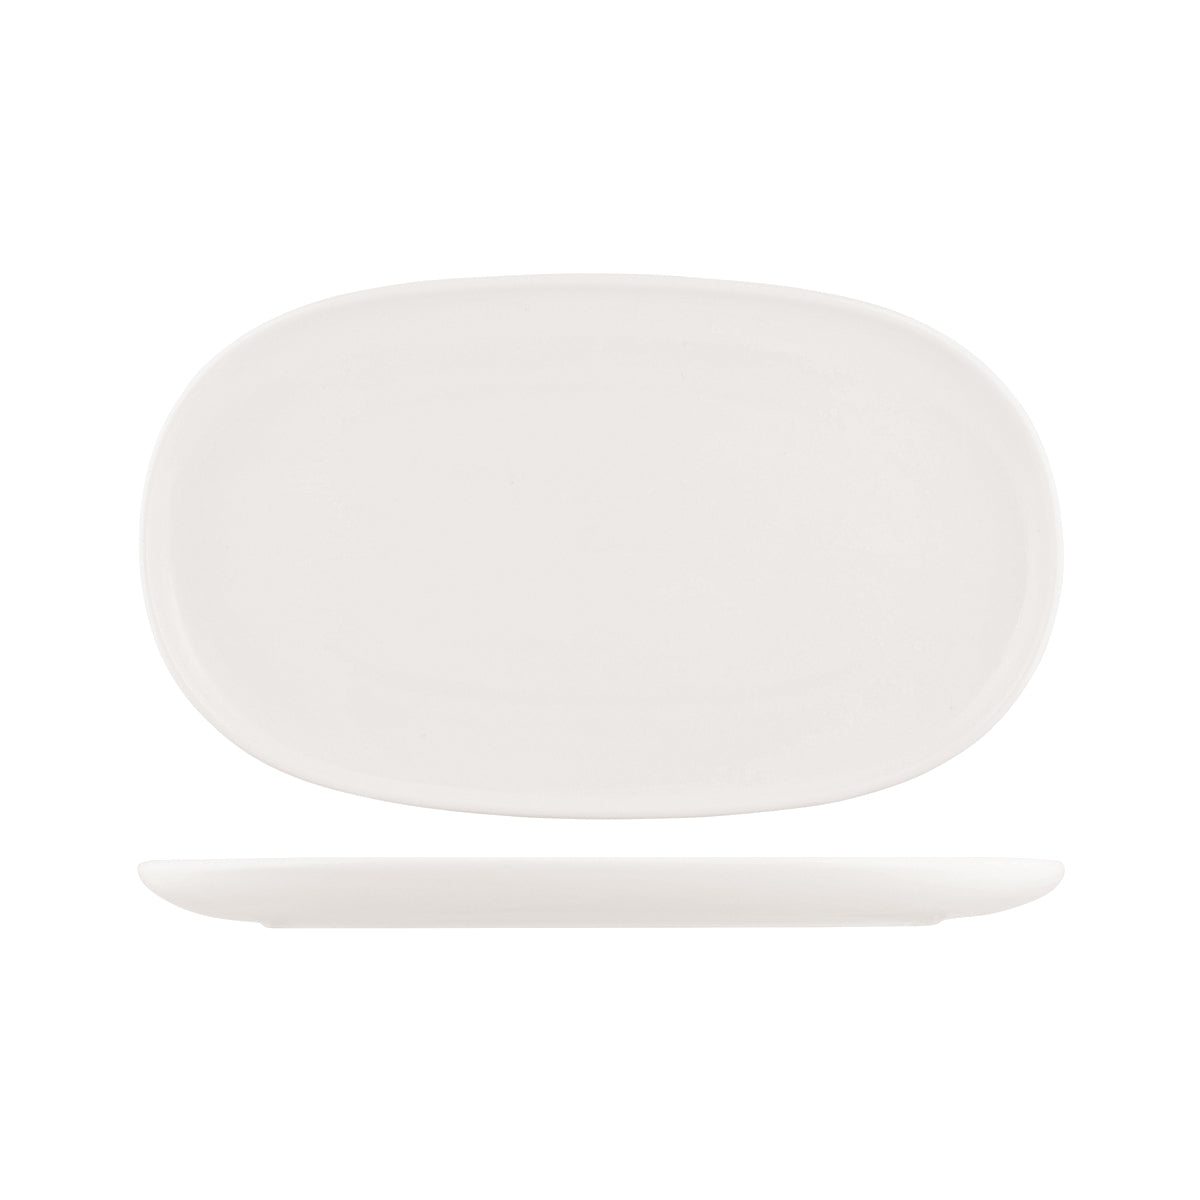 Oval plate - 405mm, Snow, Moda Porcelain from Moda Porcelain. made out of Porcelain and sold in boxes of 3. Hospitality quality at wholesale price with The Flying Fork! 